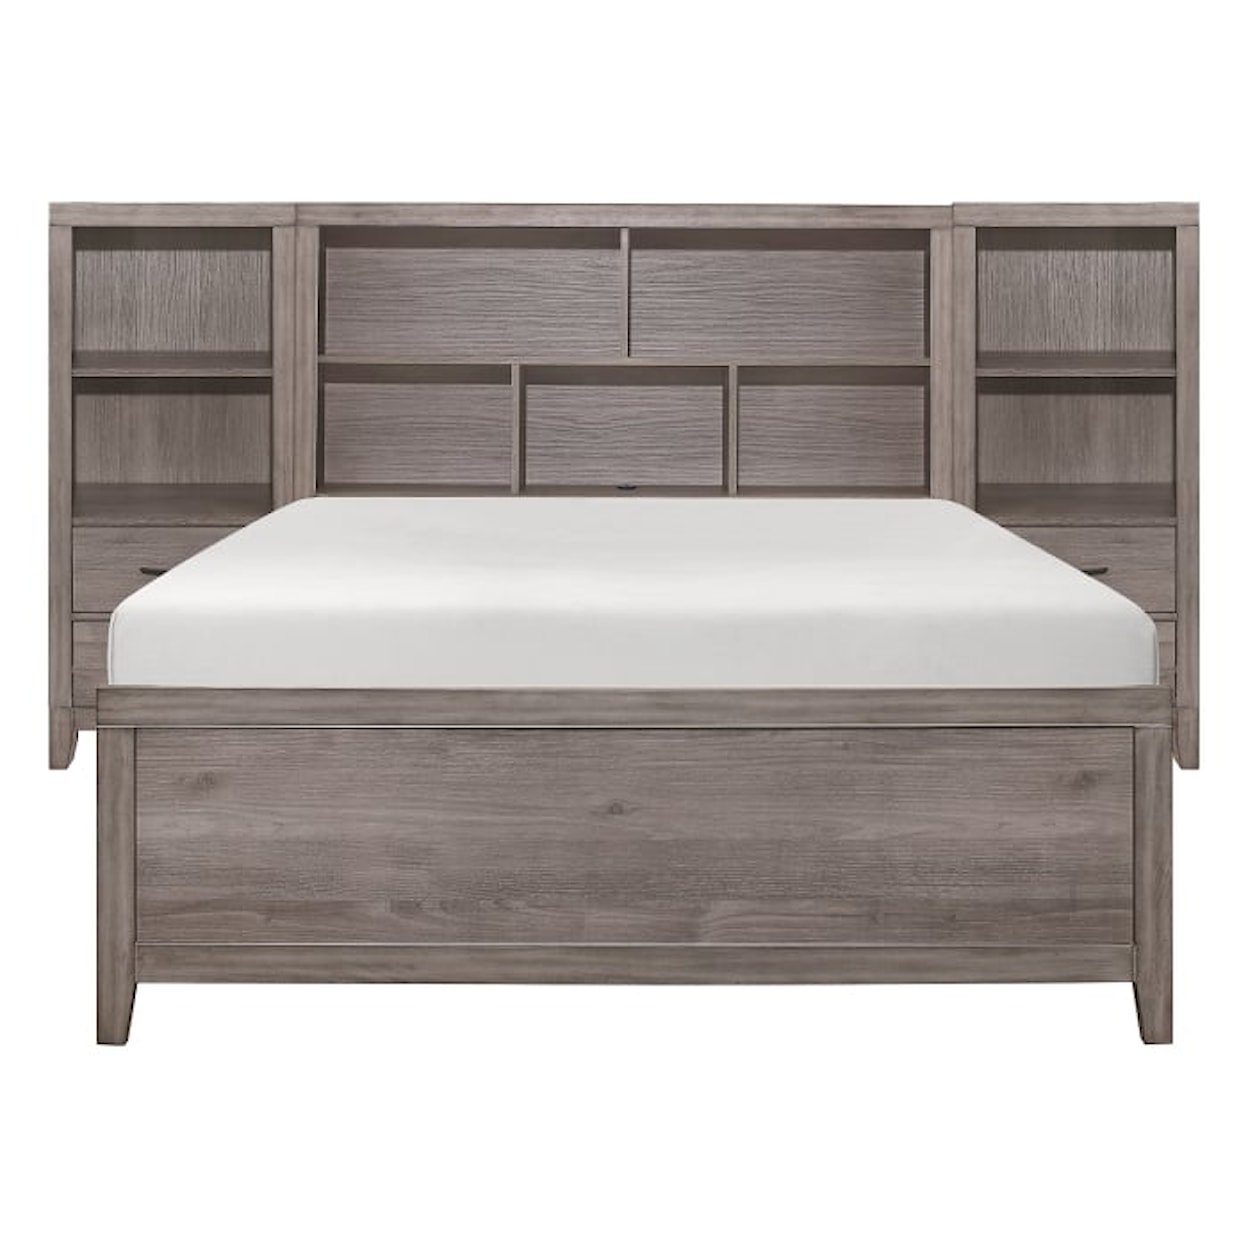 Homelegance Woodrow 3- Piece Full Wall Bed